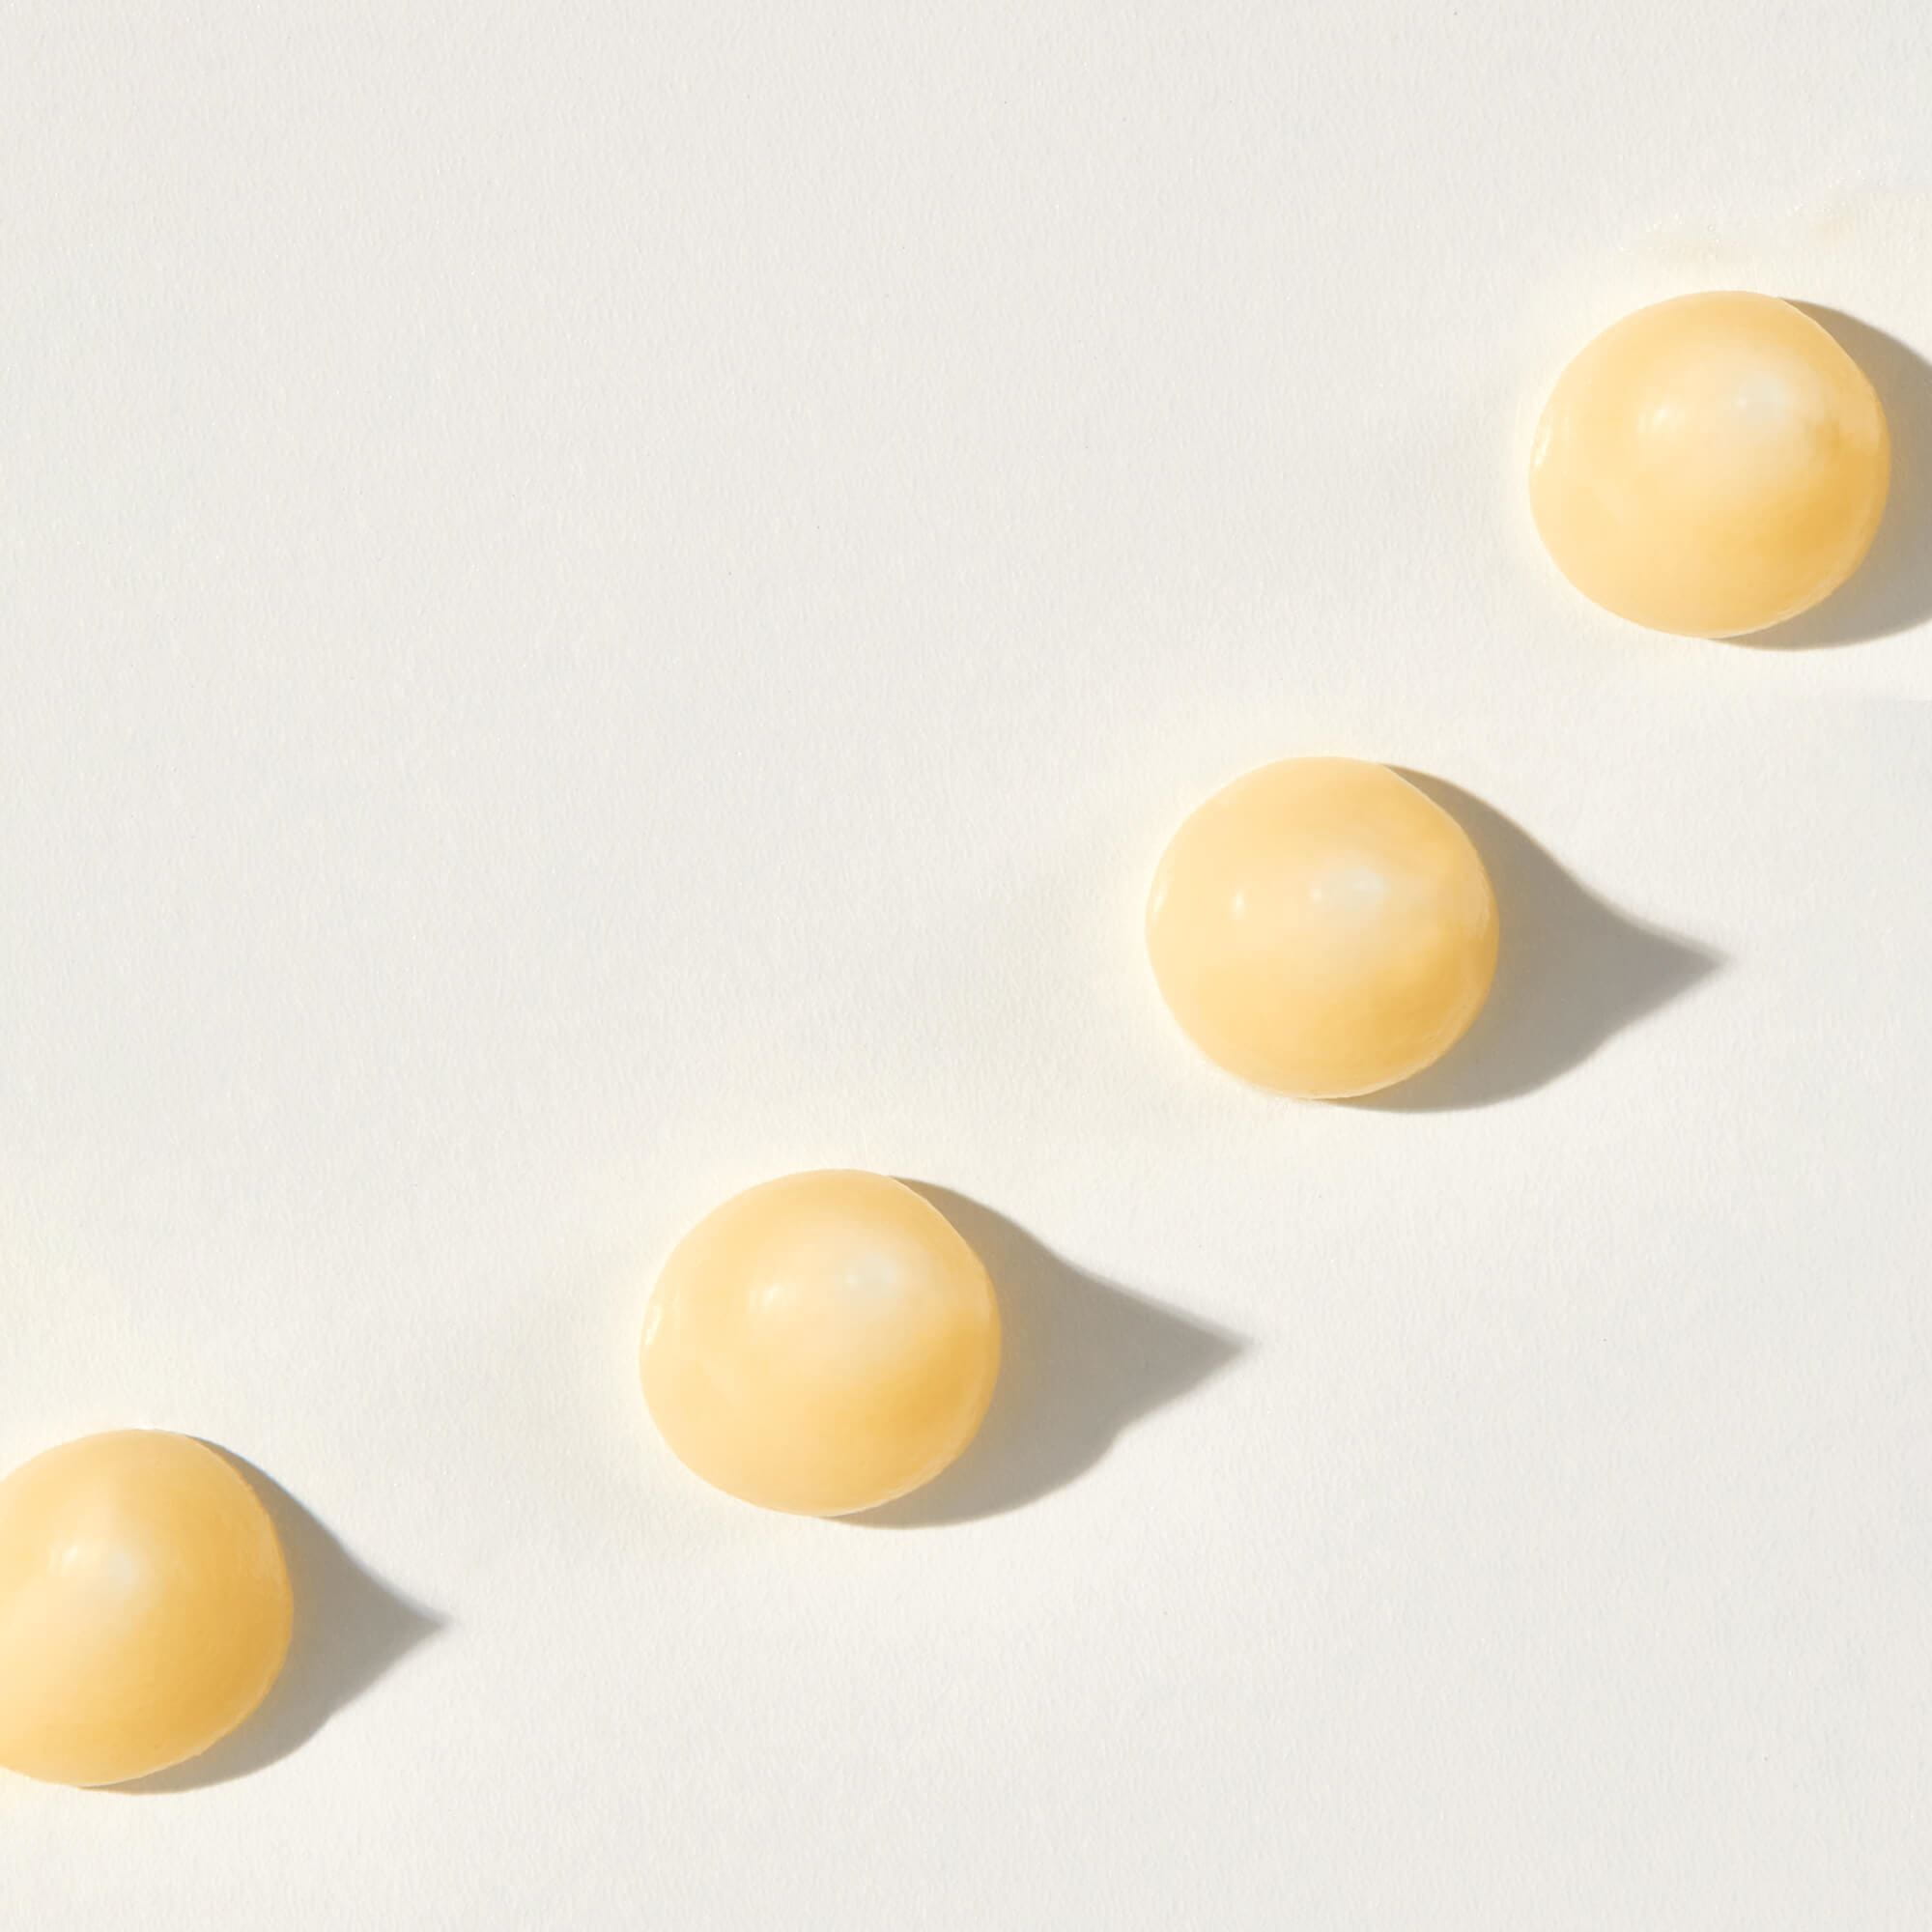 A closeup view of yellow coloured peptides against a white background.